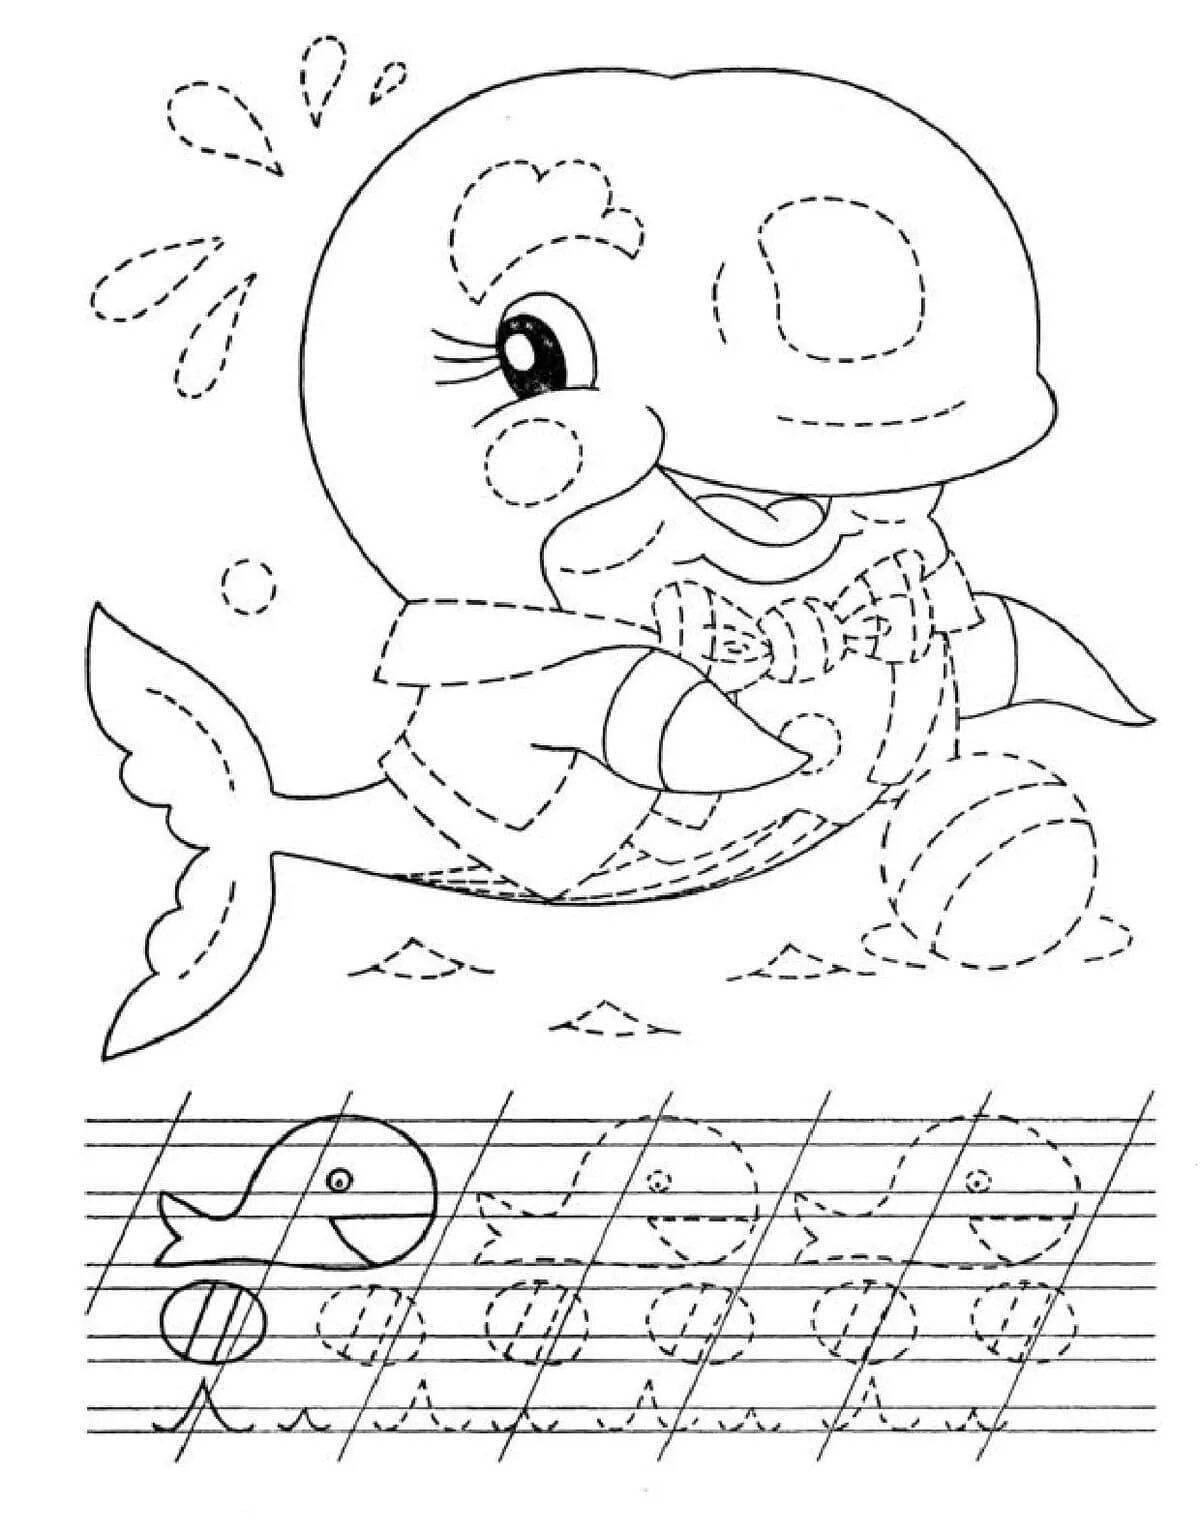 Colorful recipe coloring page for 3-4 year olds